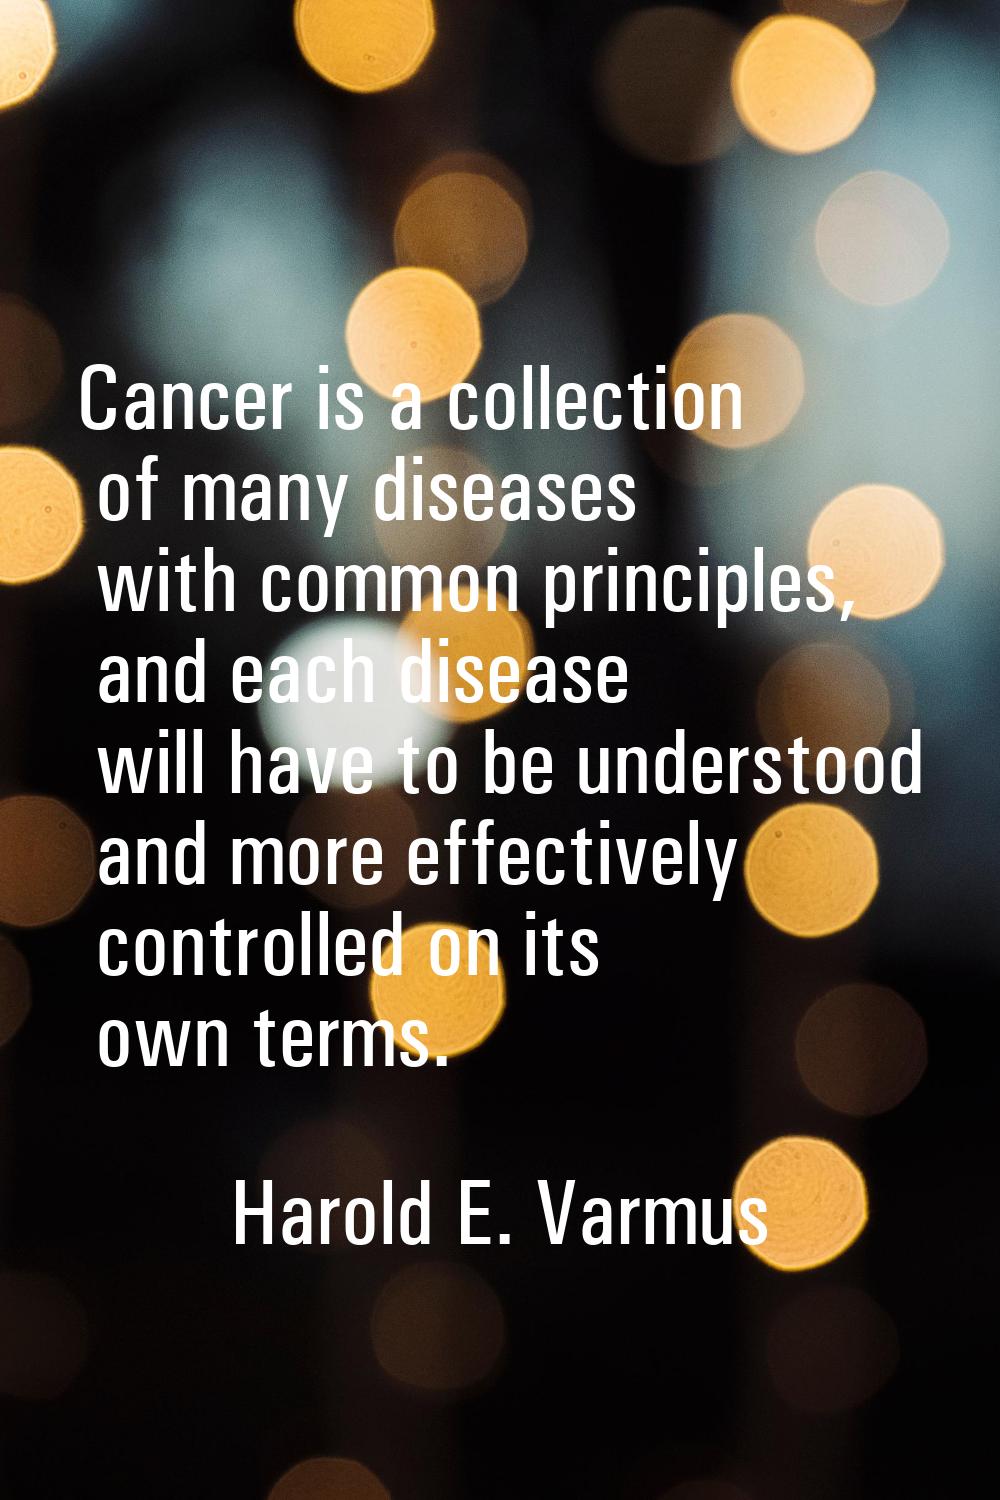 Cancer is a collection of many diseases with common principles, and each disease will have to be un